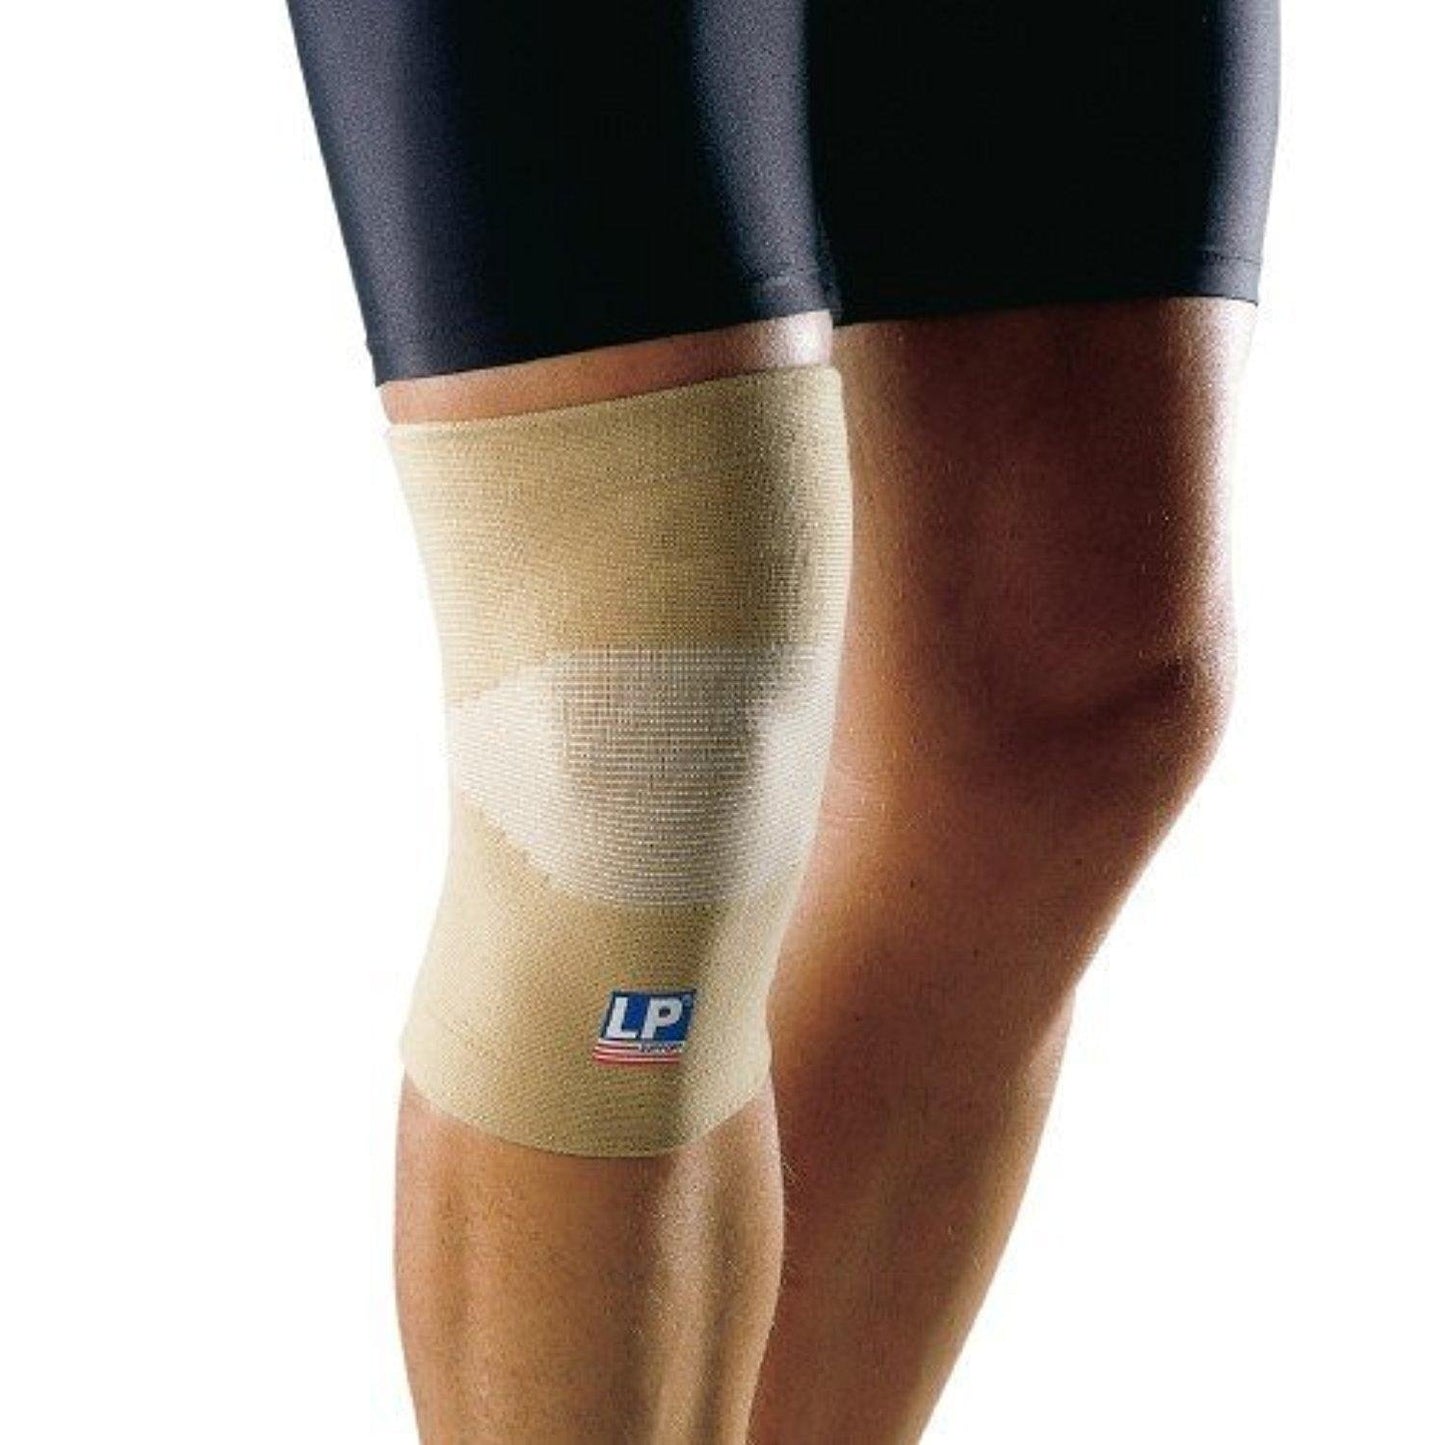 L.P KNEE SUPPORT 941- LARGE